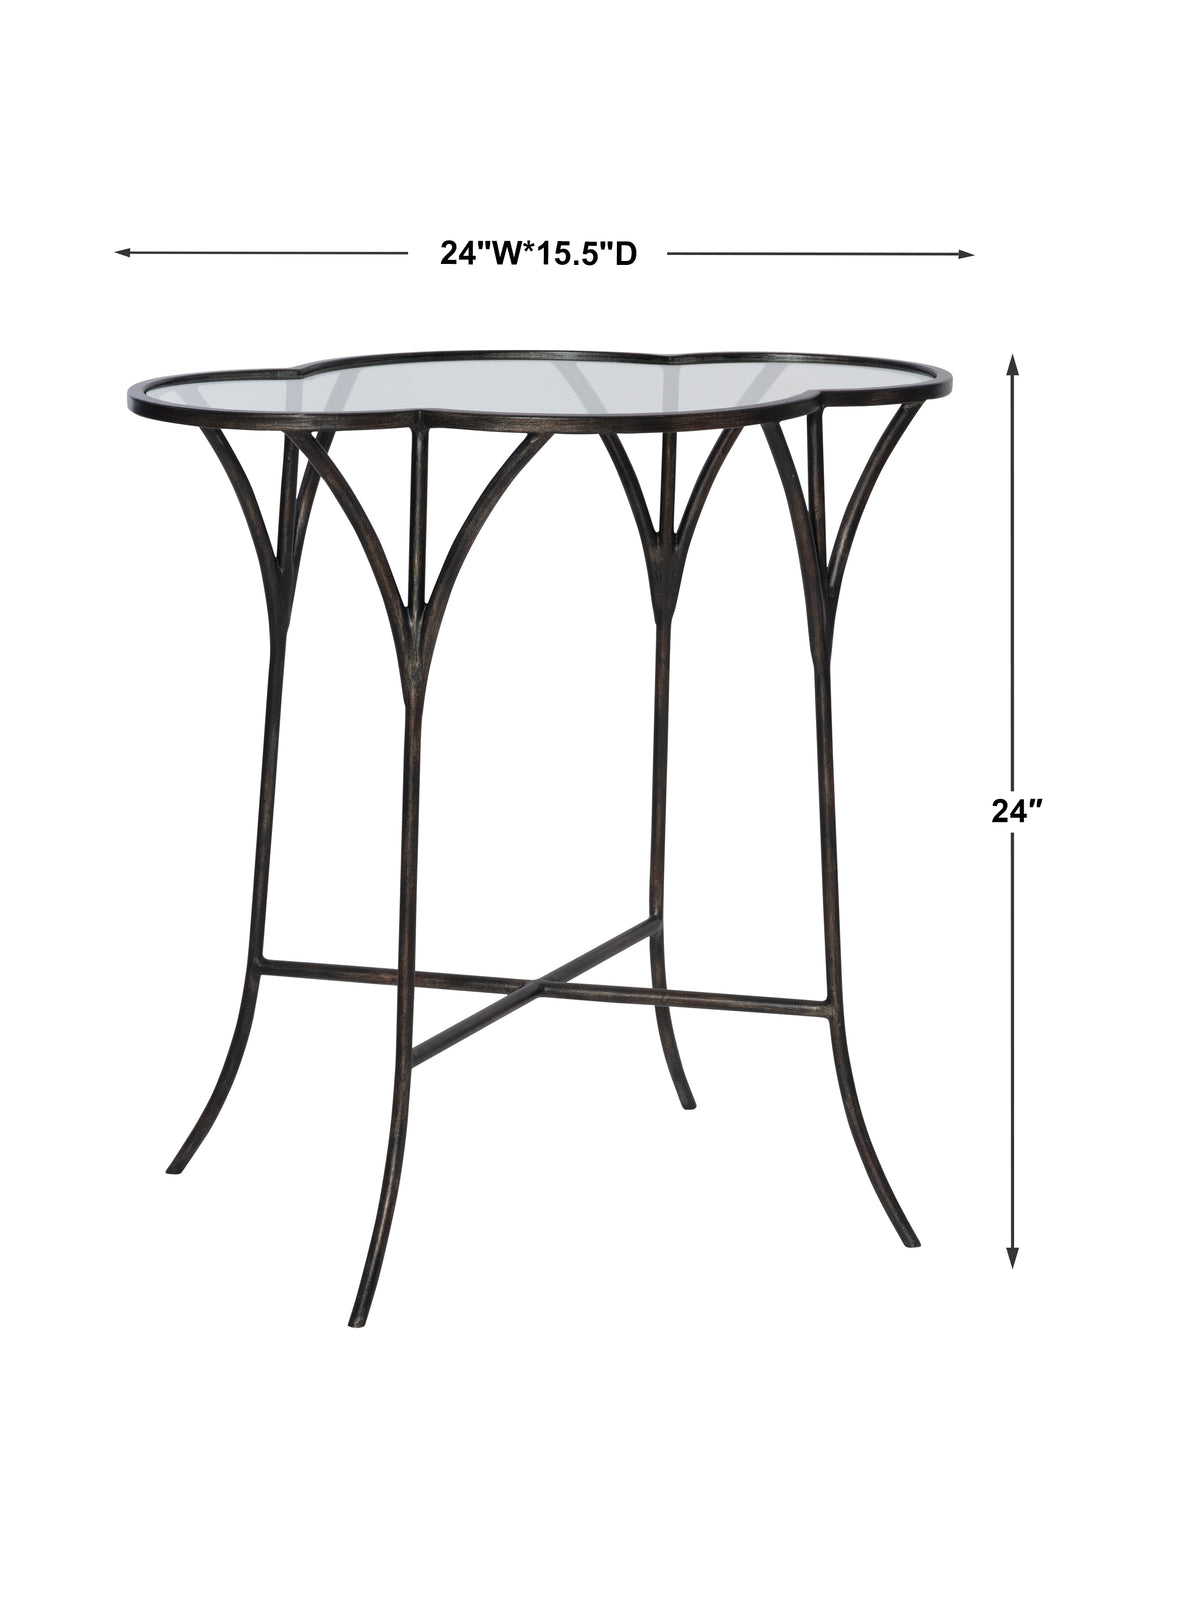 Uttermost Adhira Glass Accent Table